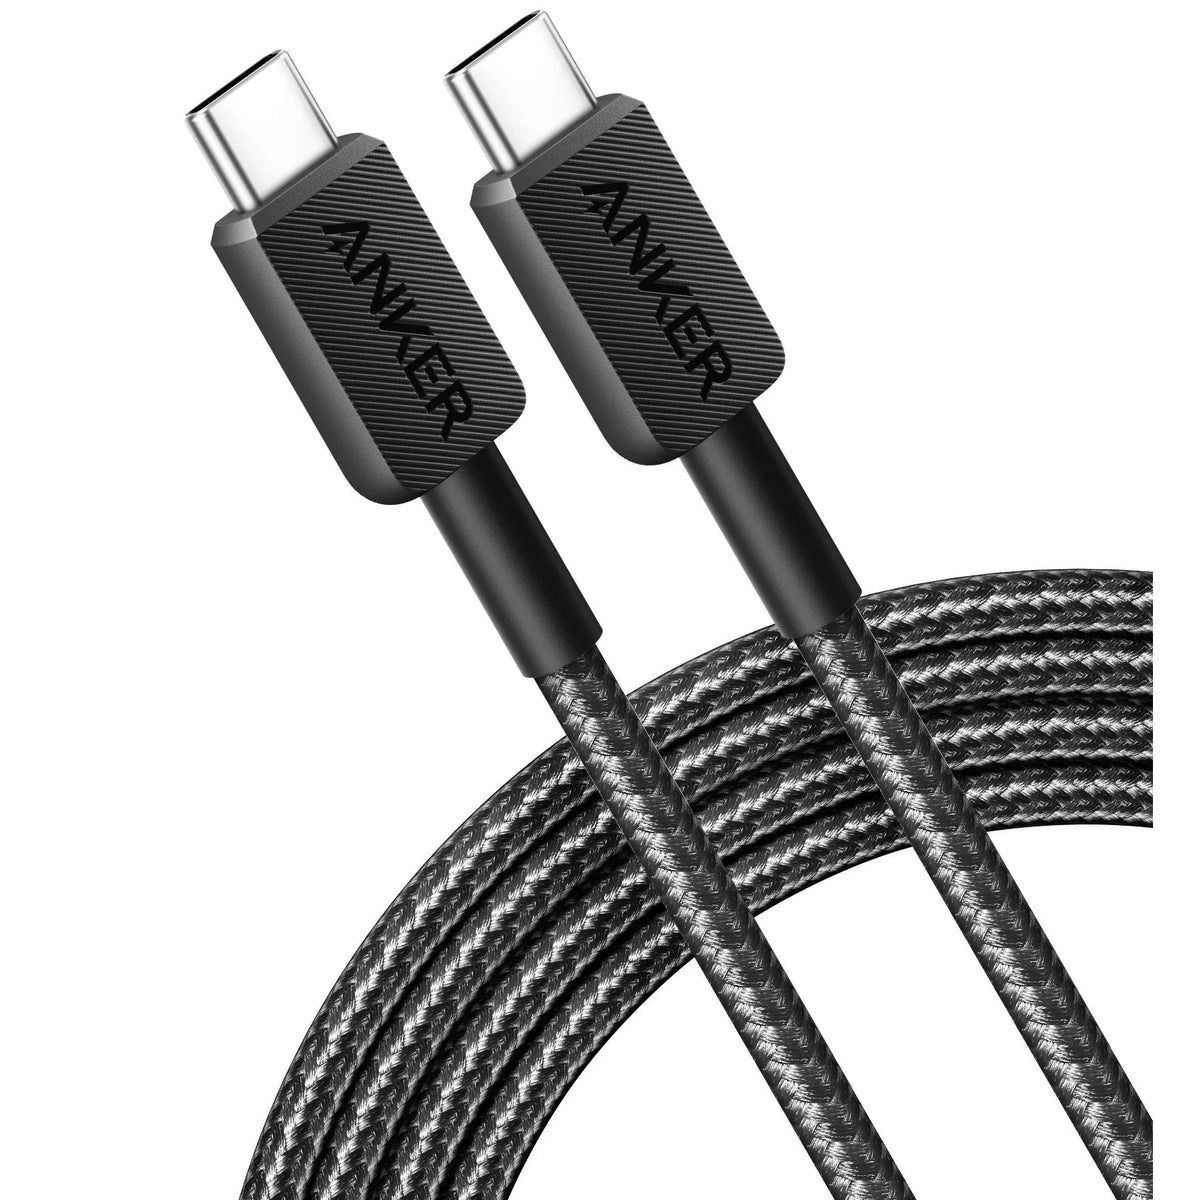 Anker A81F6-322 Type-C to C Cable 1.8M